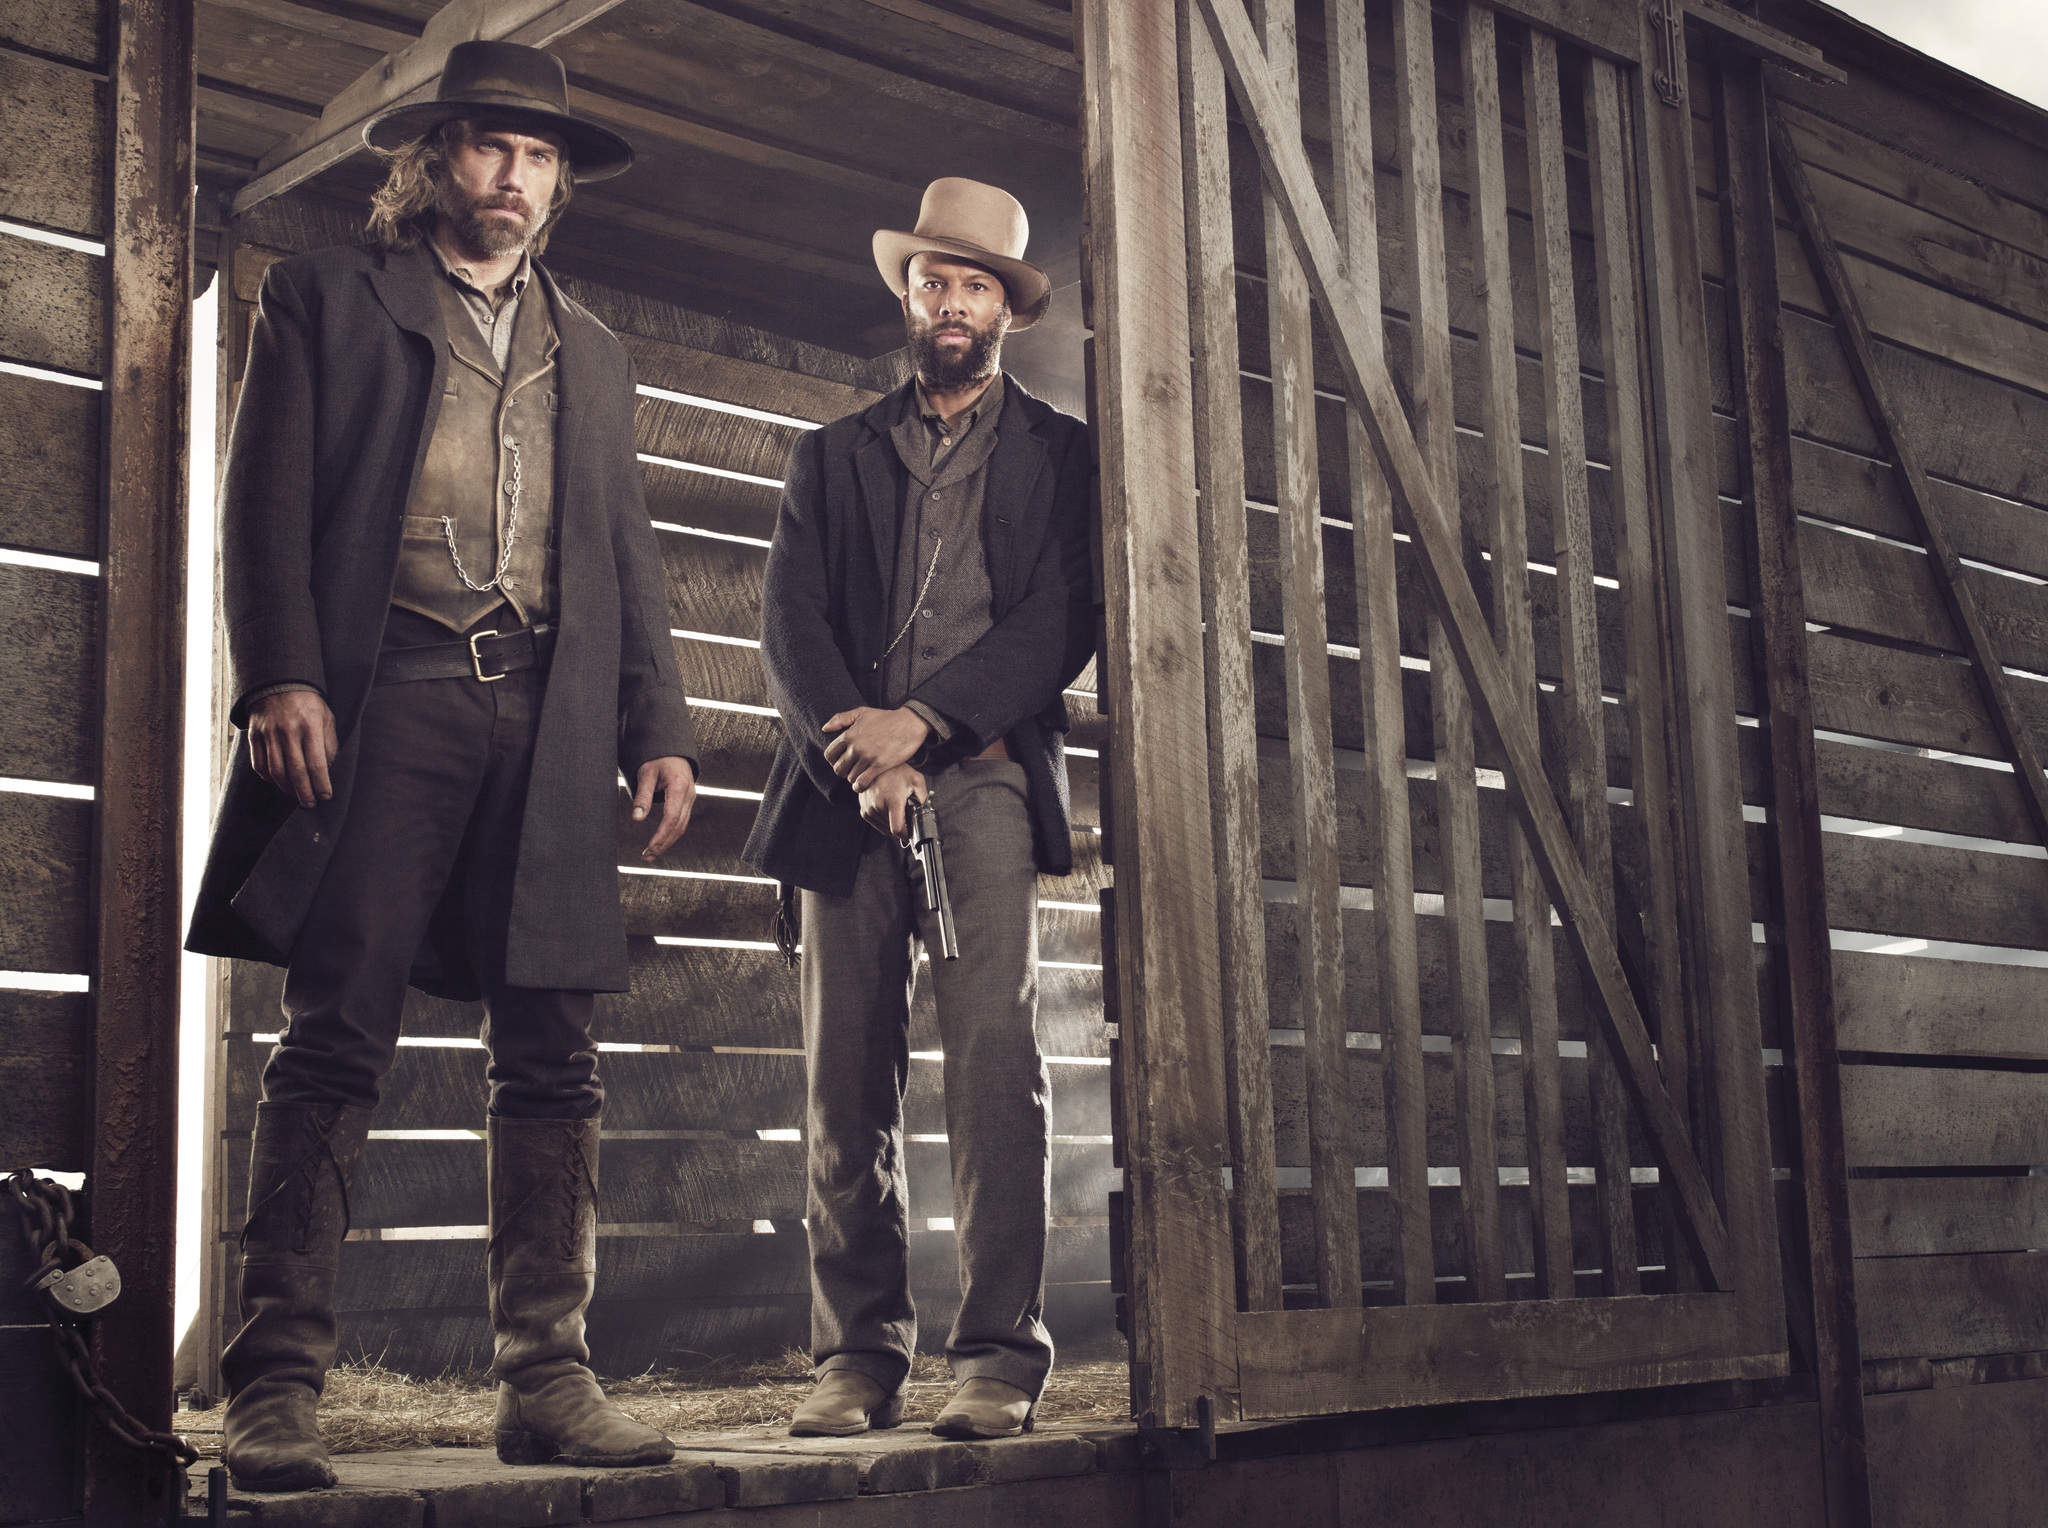 Anson Mount and Common in Hell on Wheels (2011)